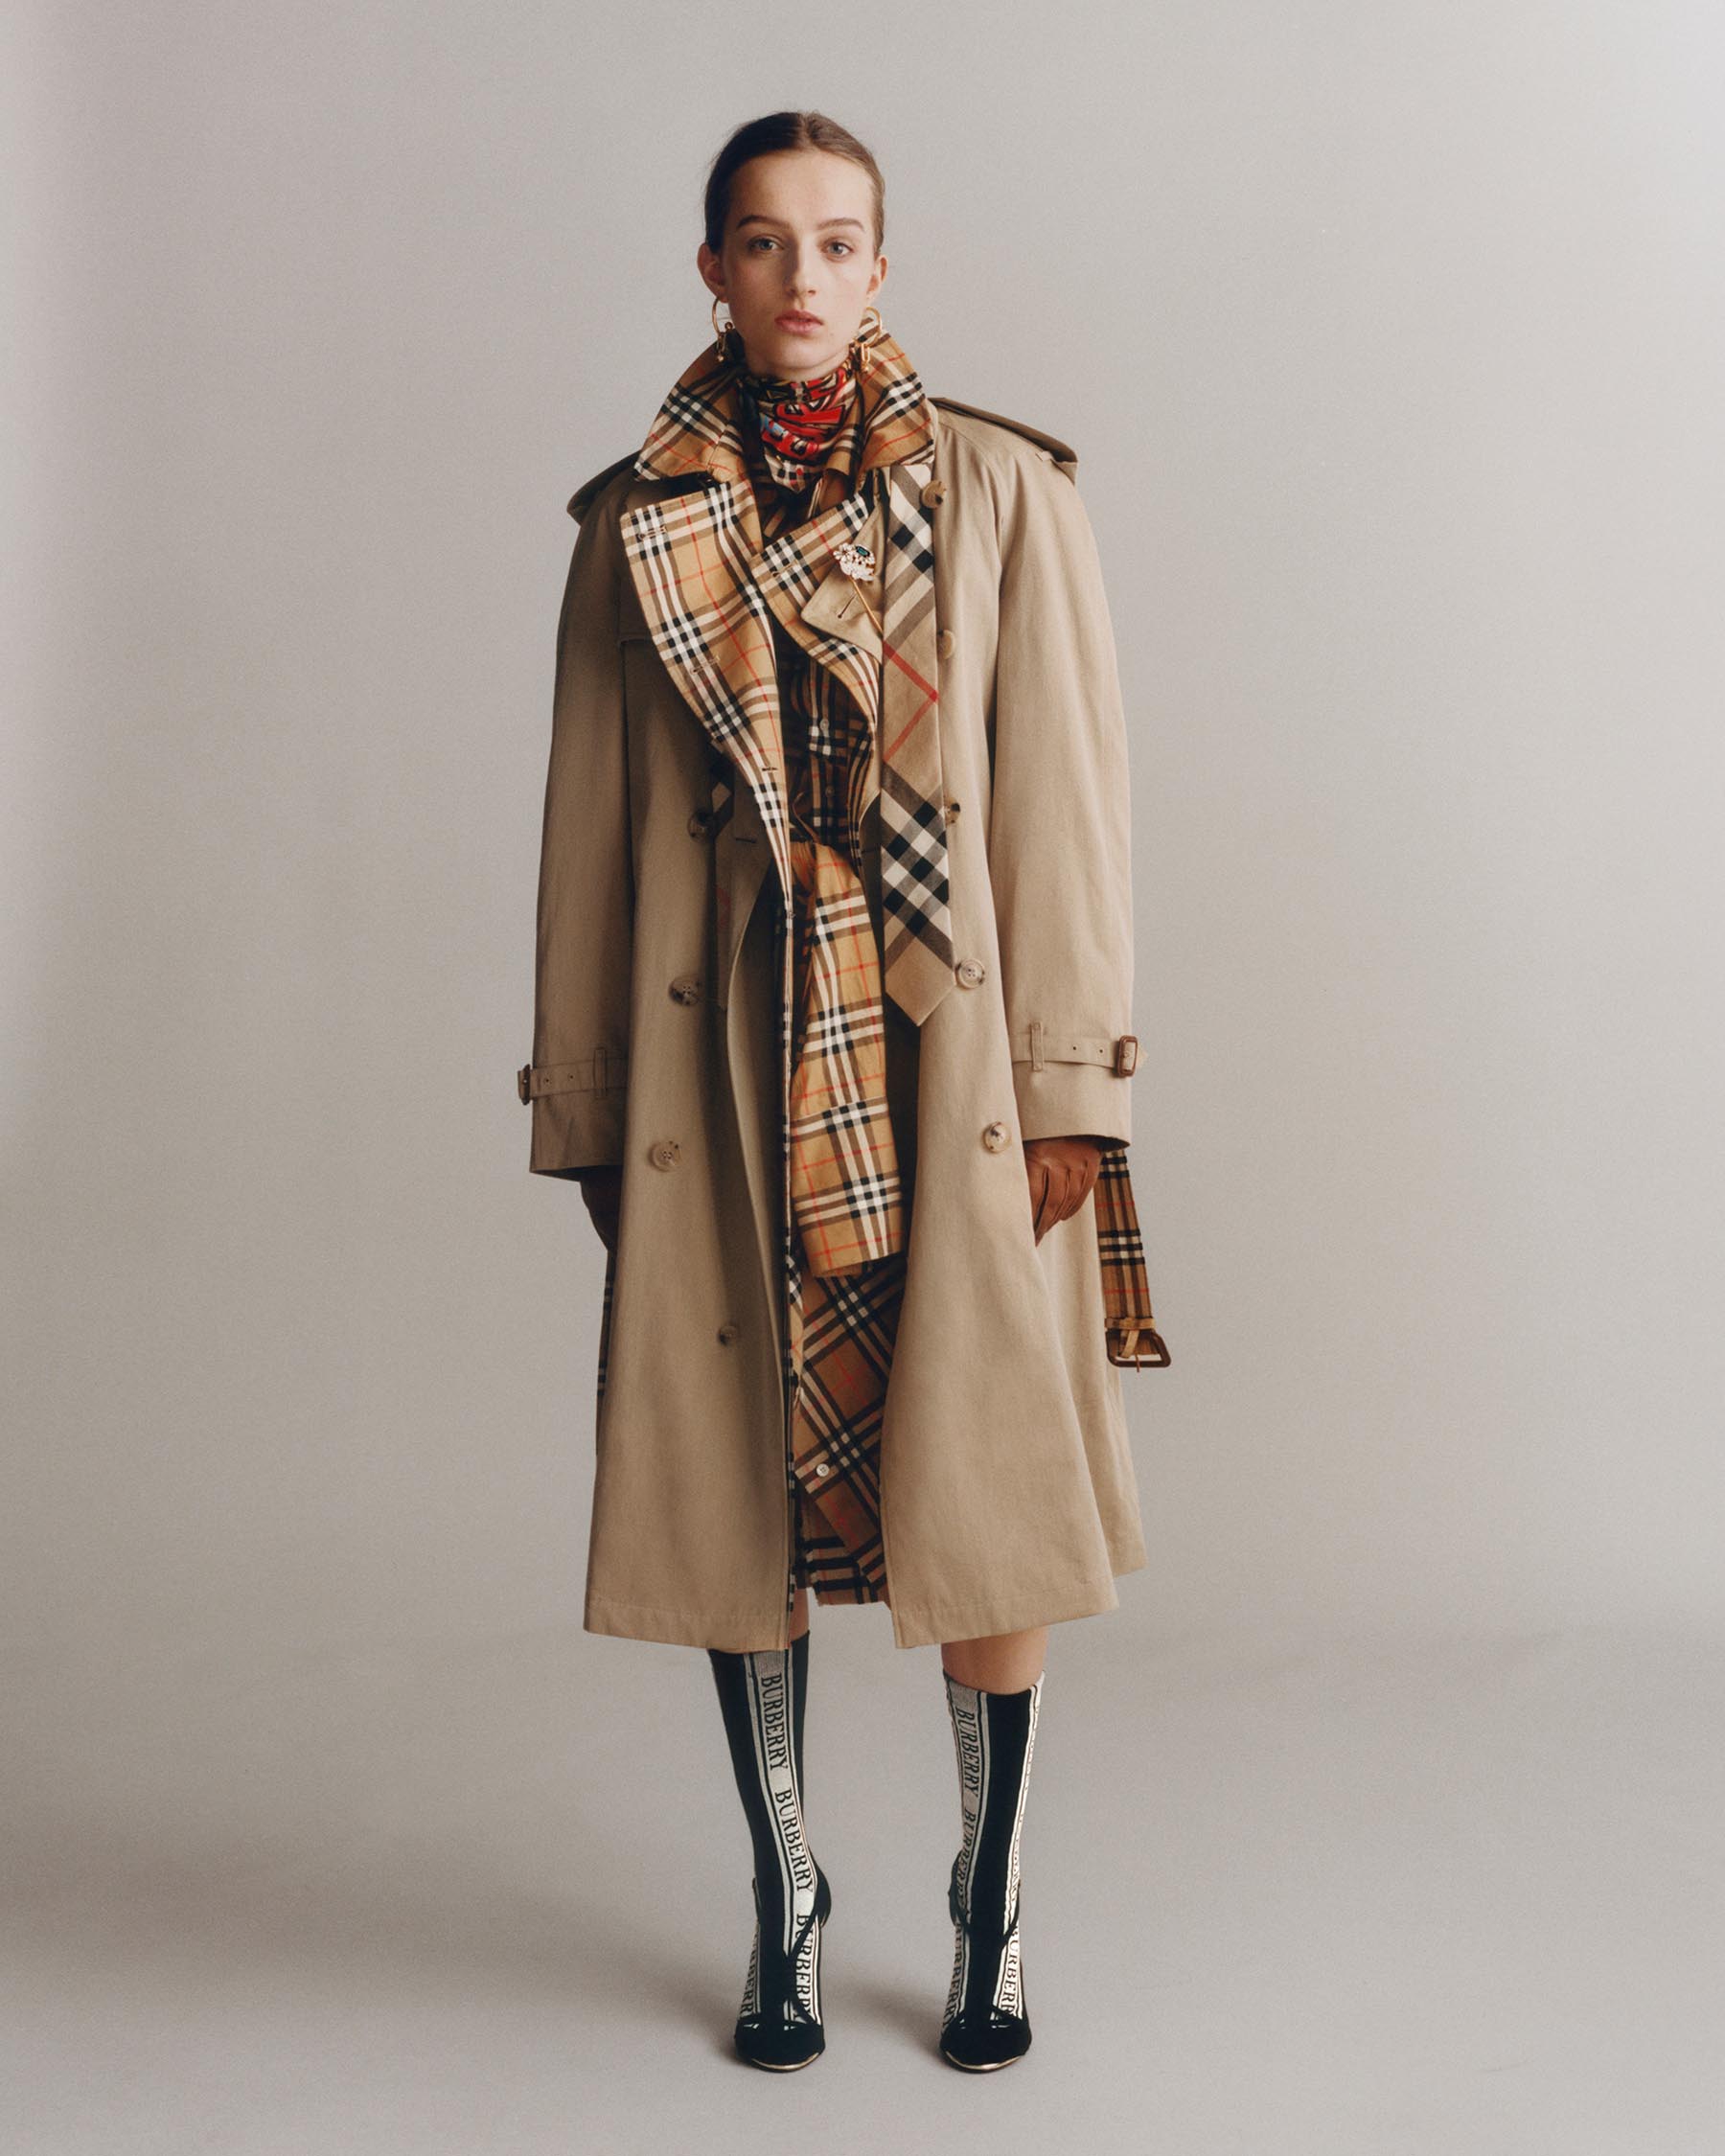 BURBERRY HERITAGE TRENCH Campaign | RUDE Magazine